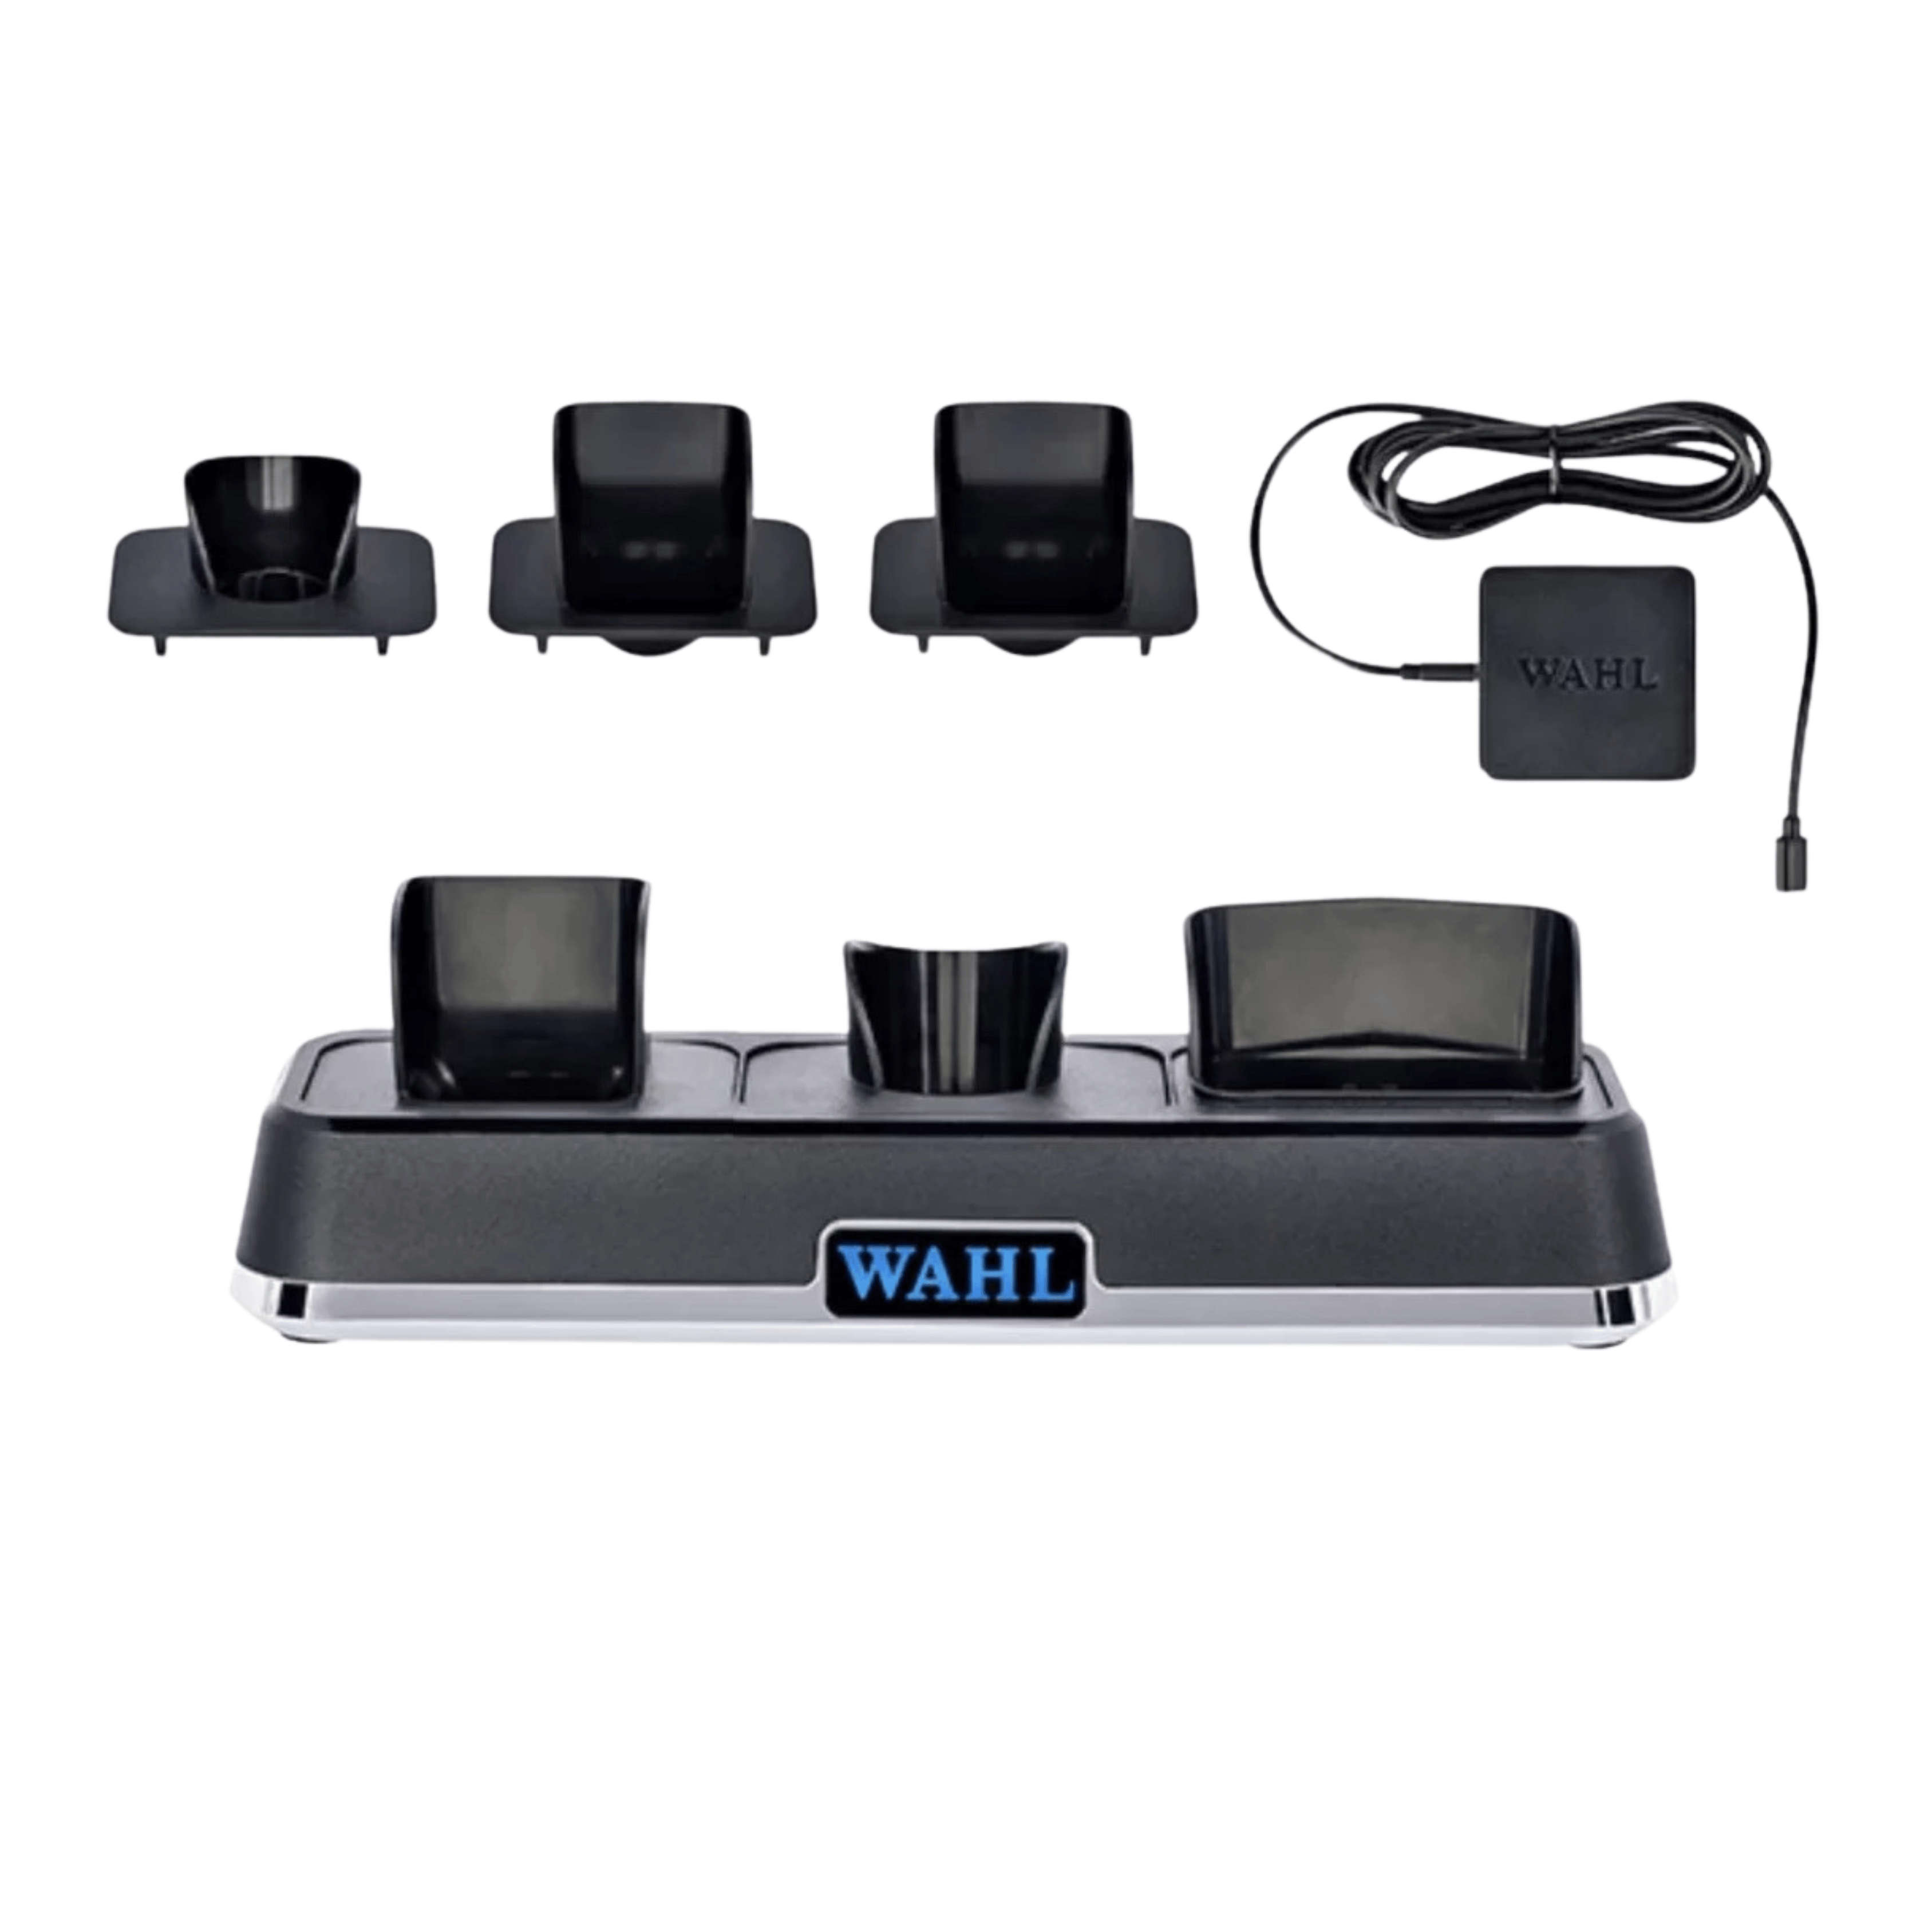 WAHL Power Station Multi-Charge #3023291WAHL